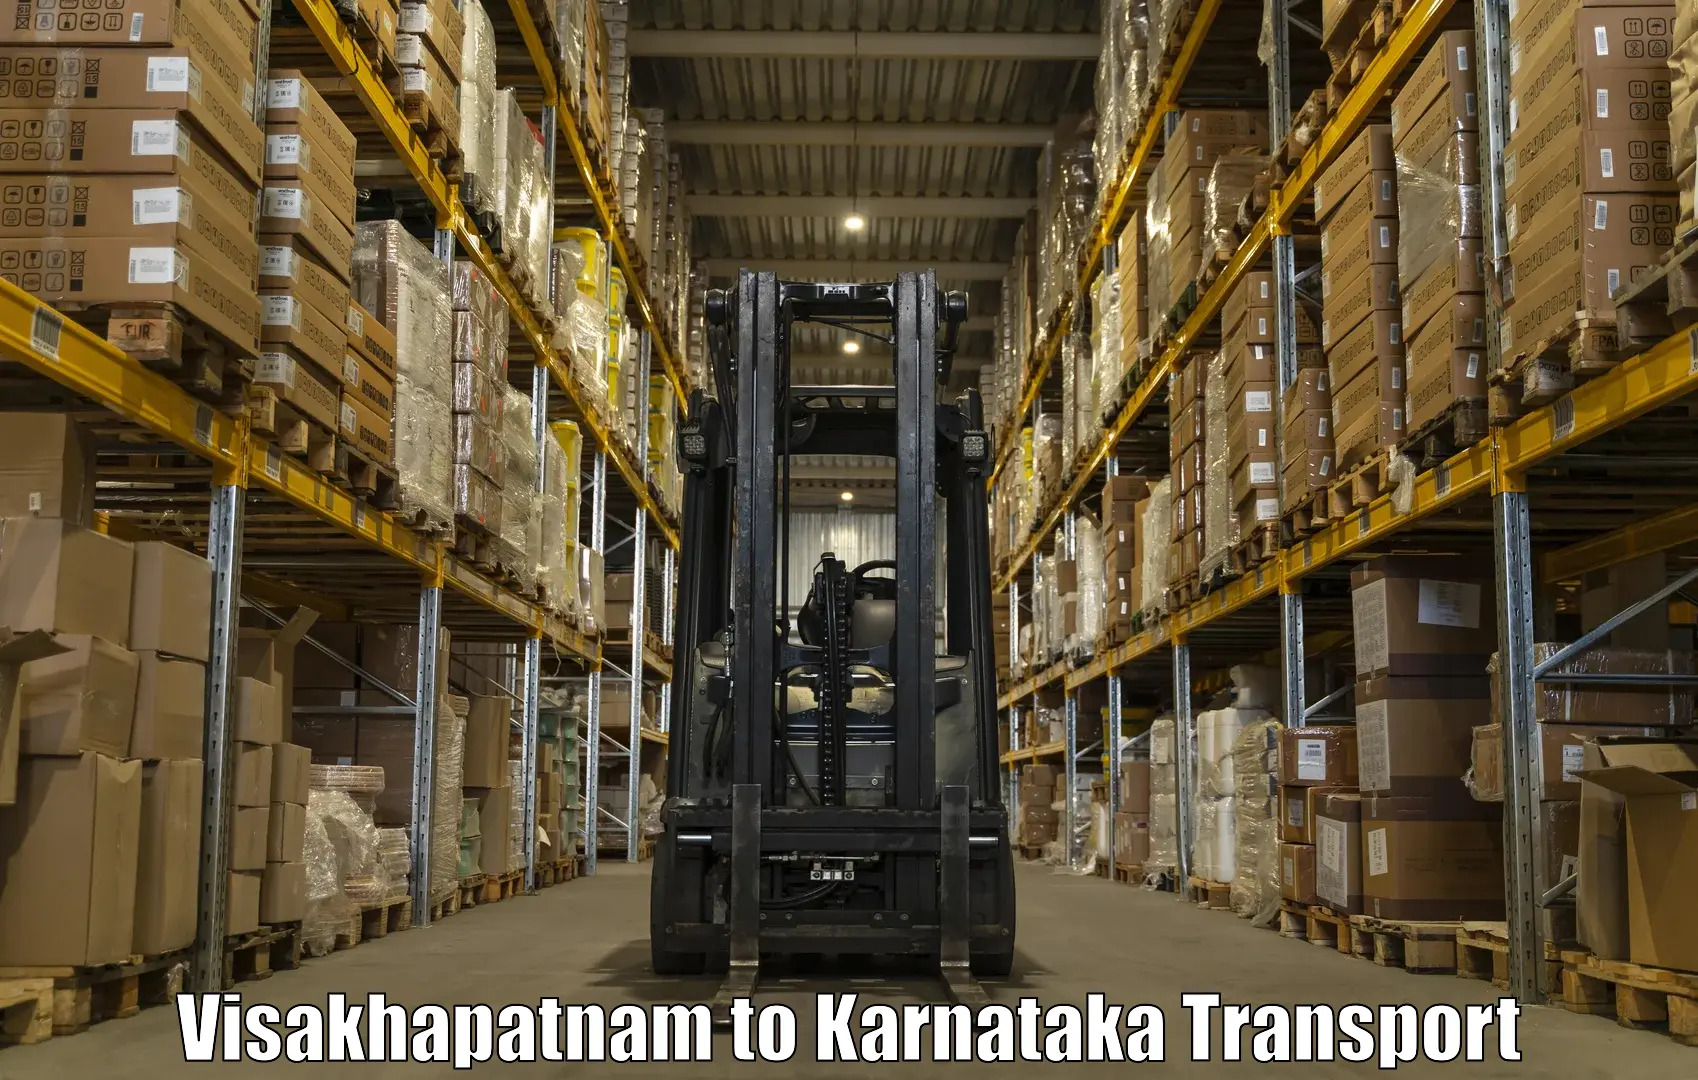 Transport bike from one state to another Visakhapatnam to Panja Dakshin Kannad